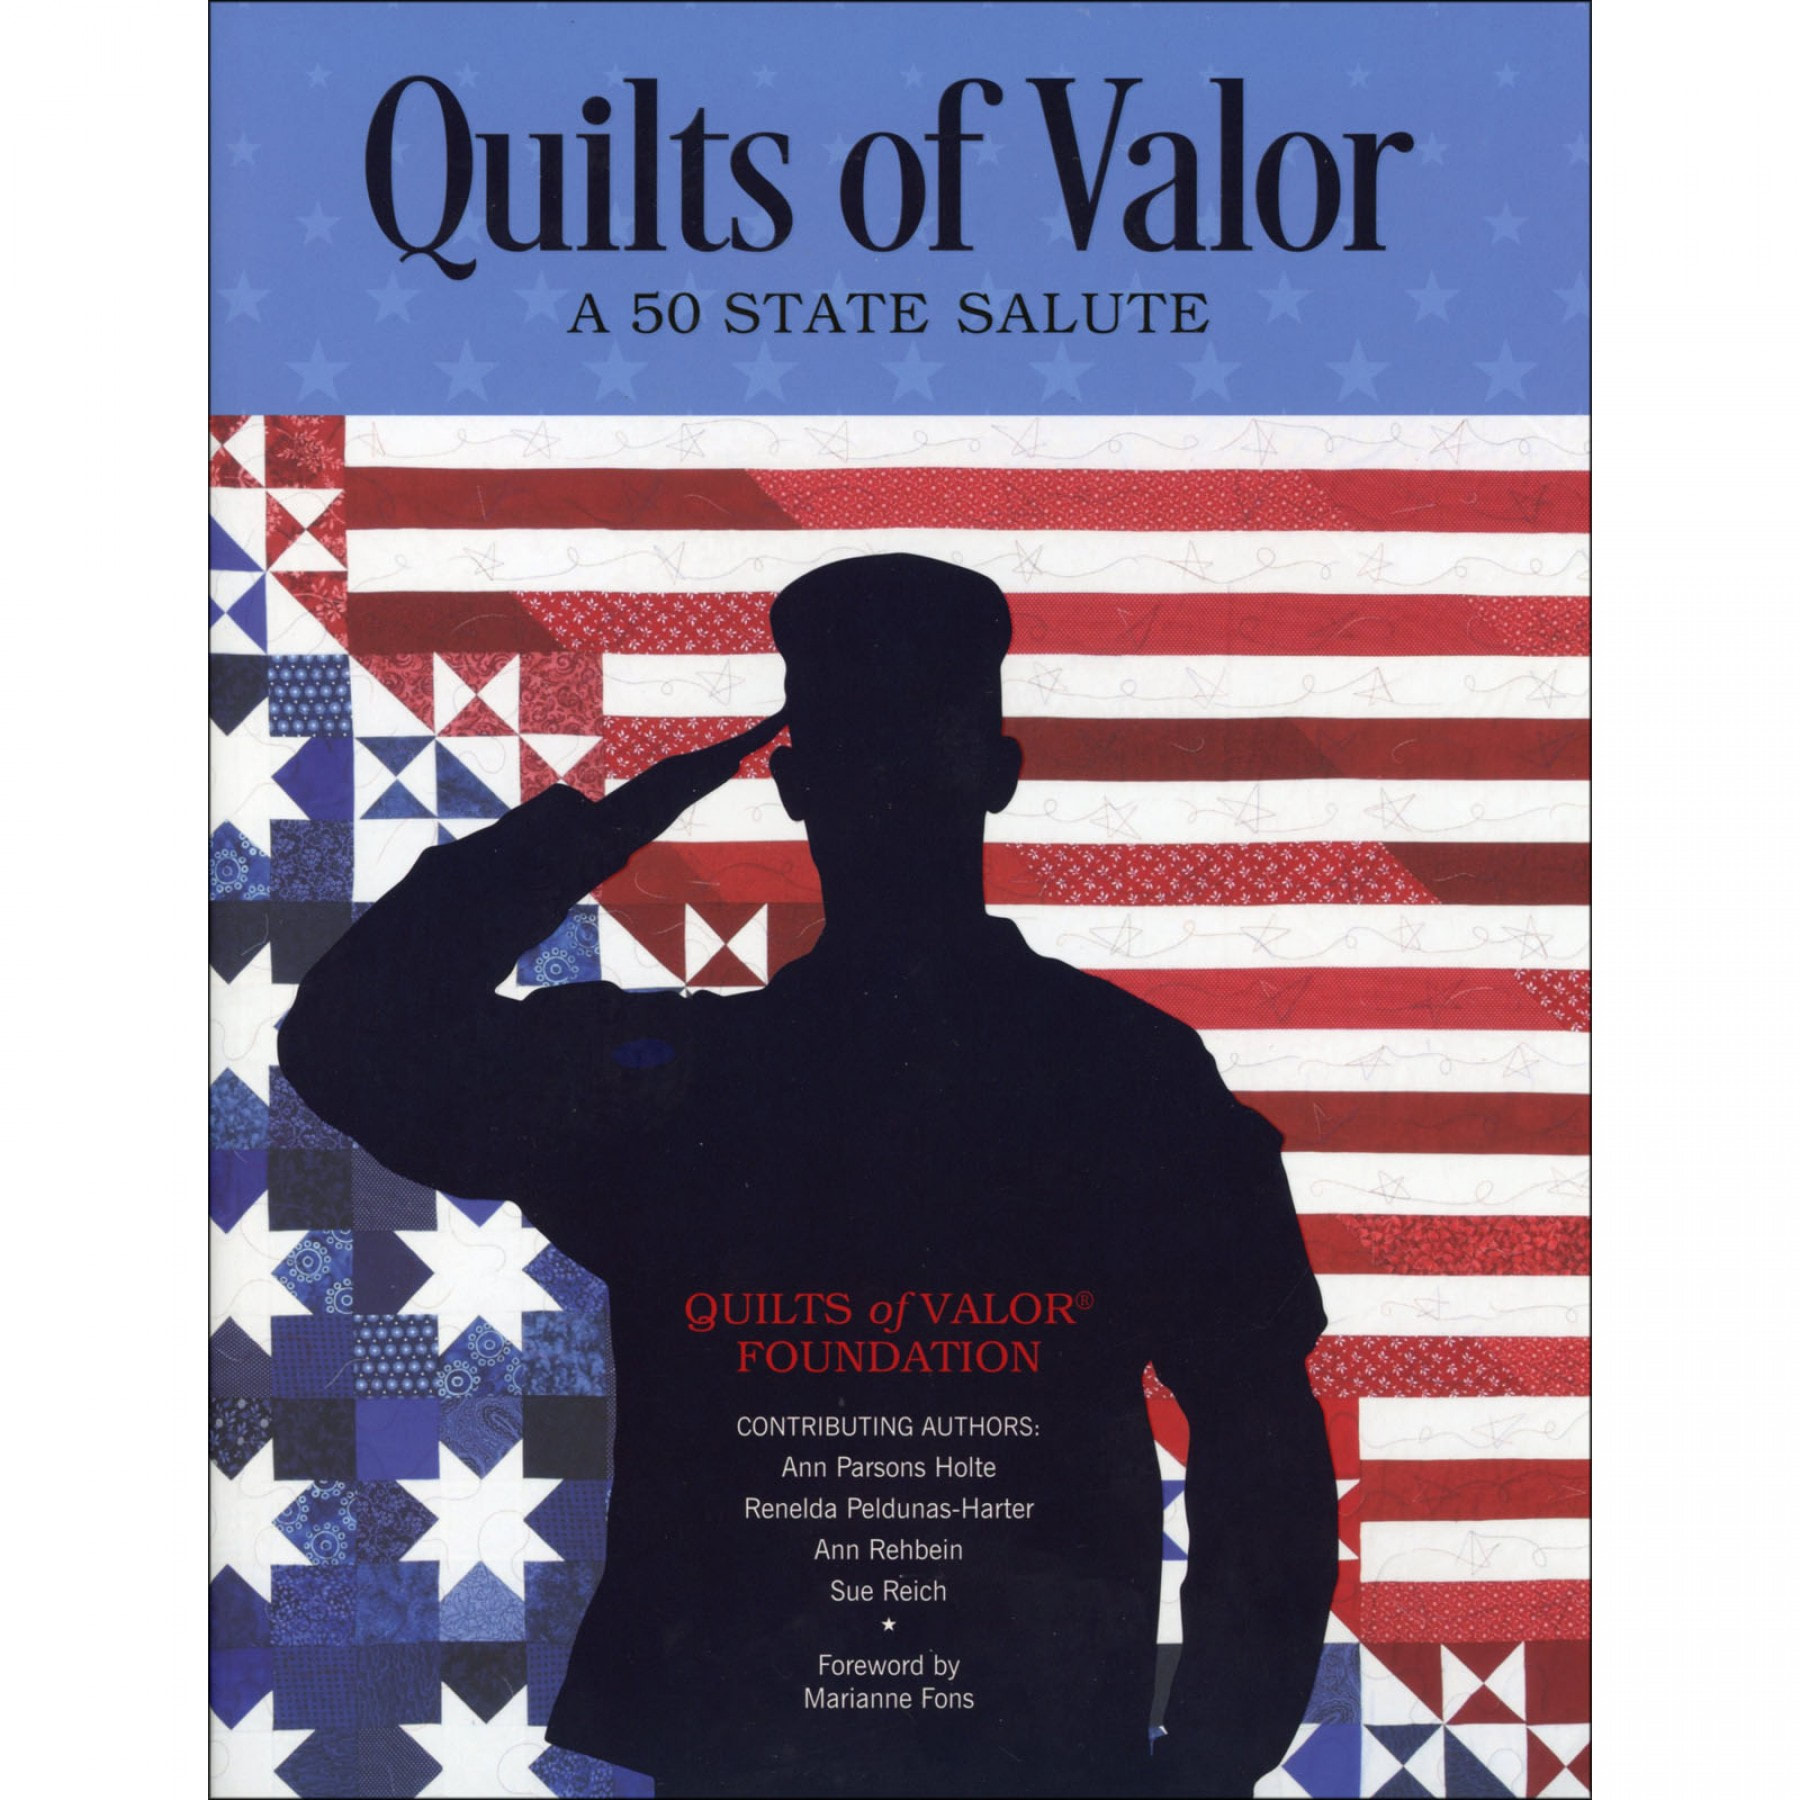 Quilts of Valor - A 50 State Salute